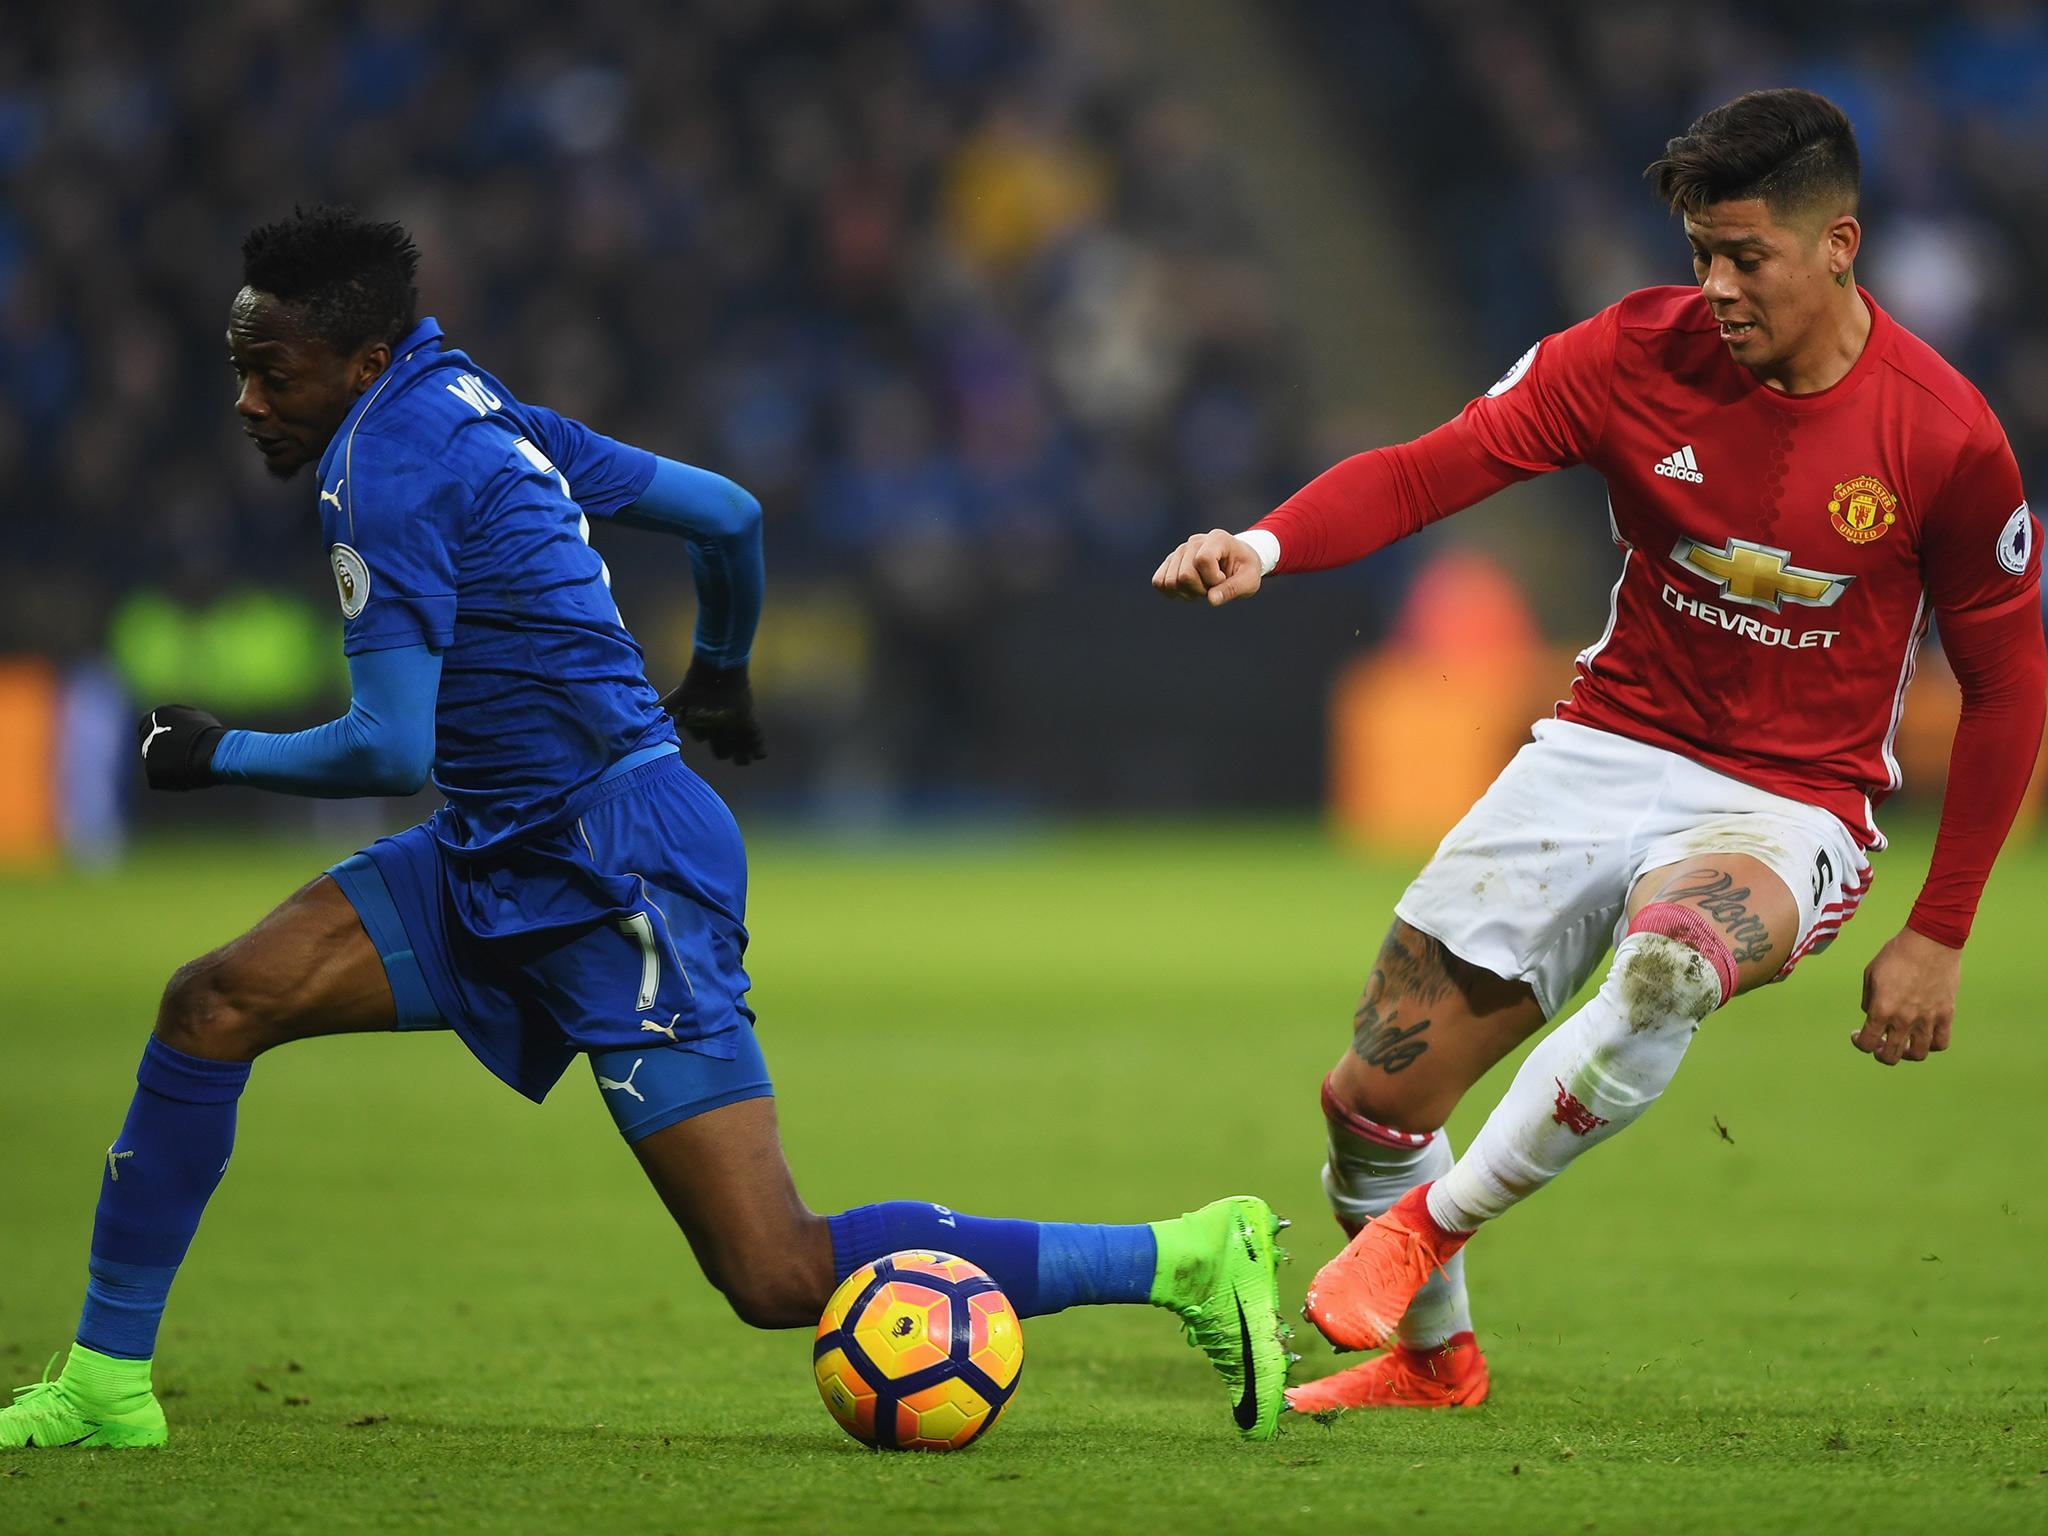 Ahmed Musa has not started for Leicester since the 3-0 loss to Manchester United (Getty)